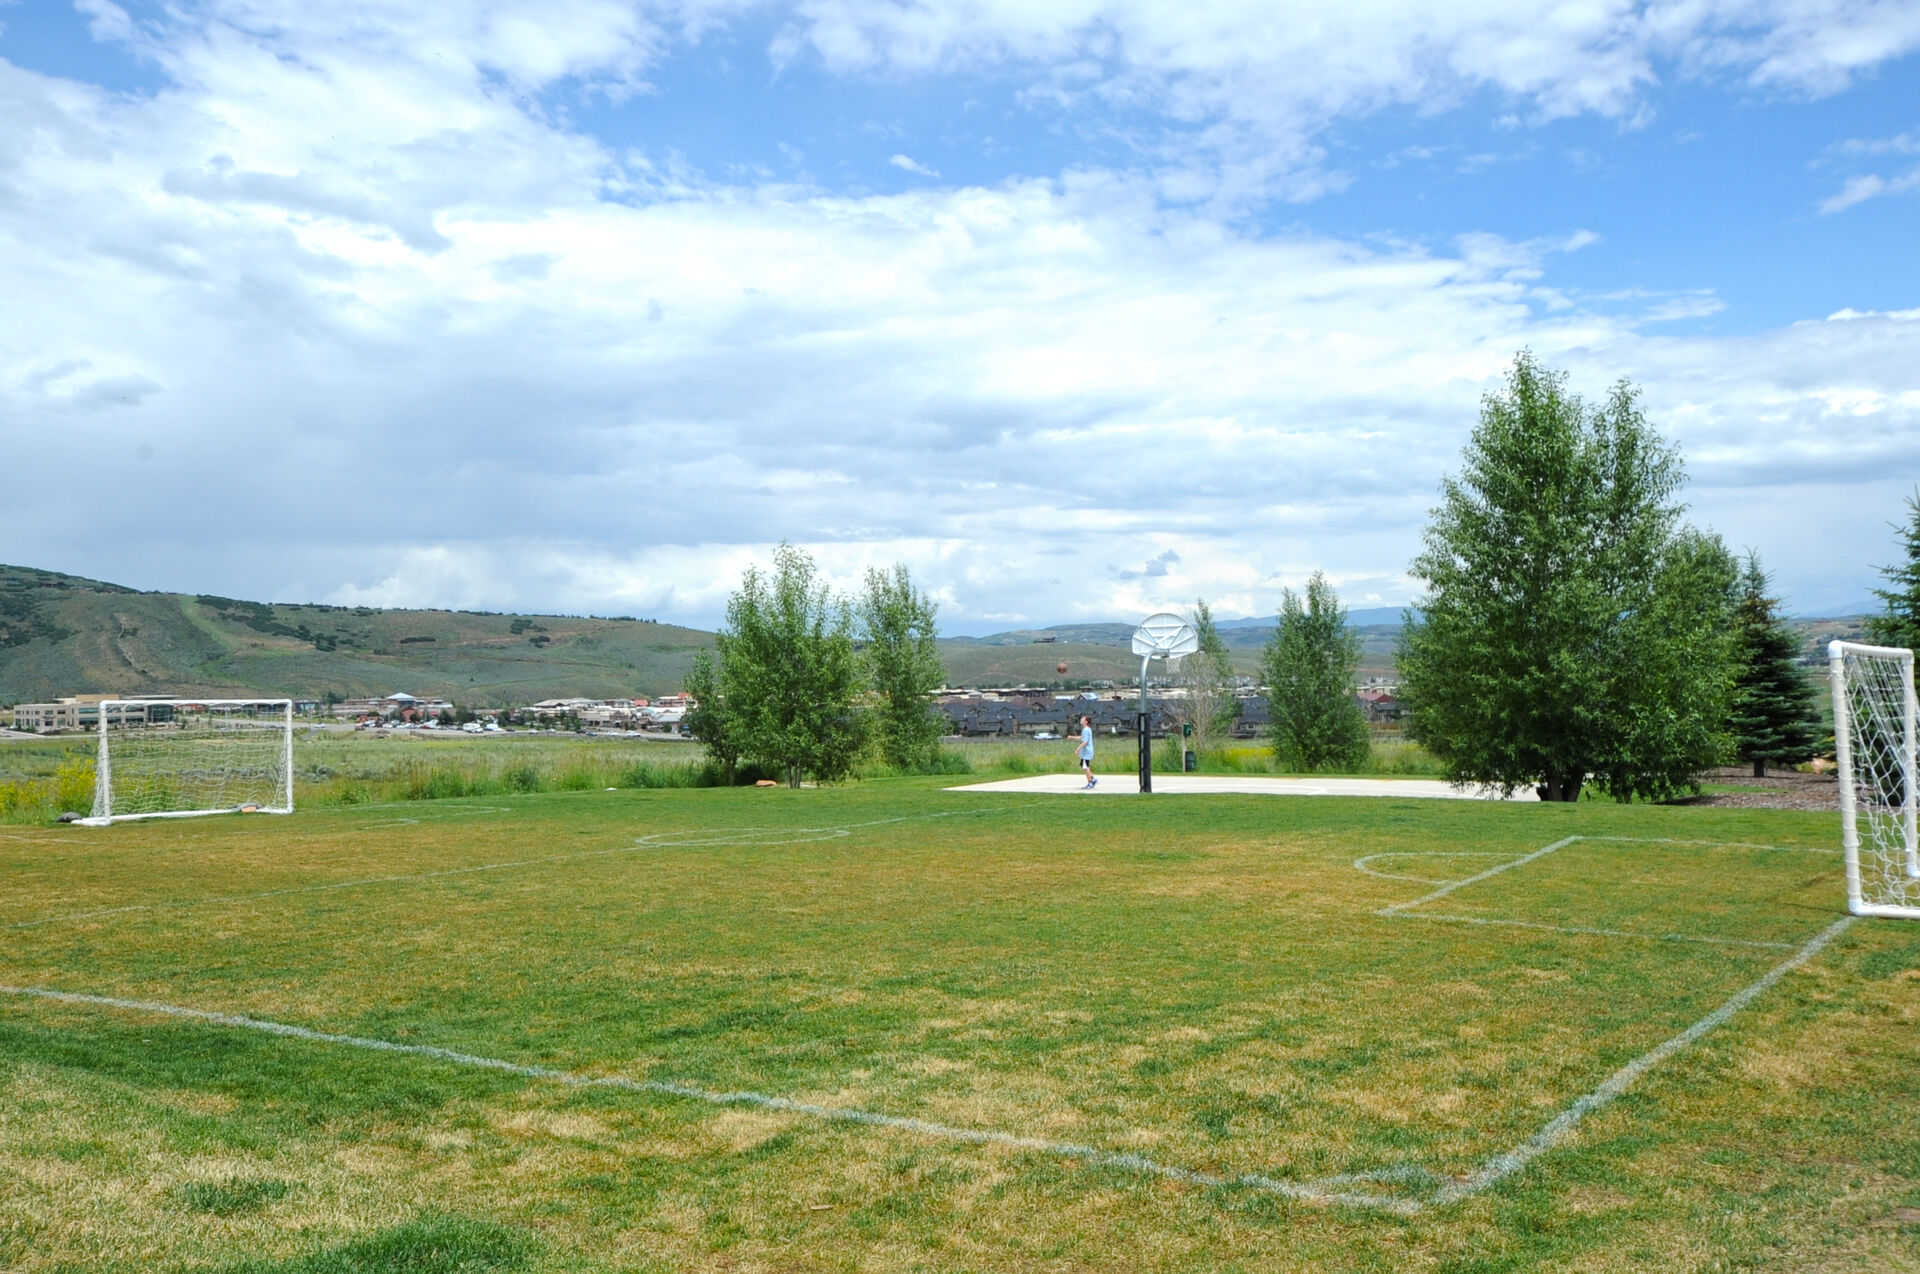 Soccer fields for access in the Bear Hollow Community